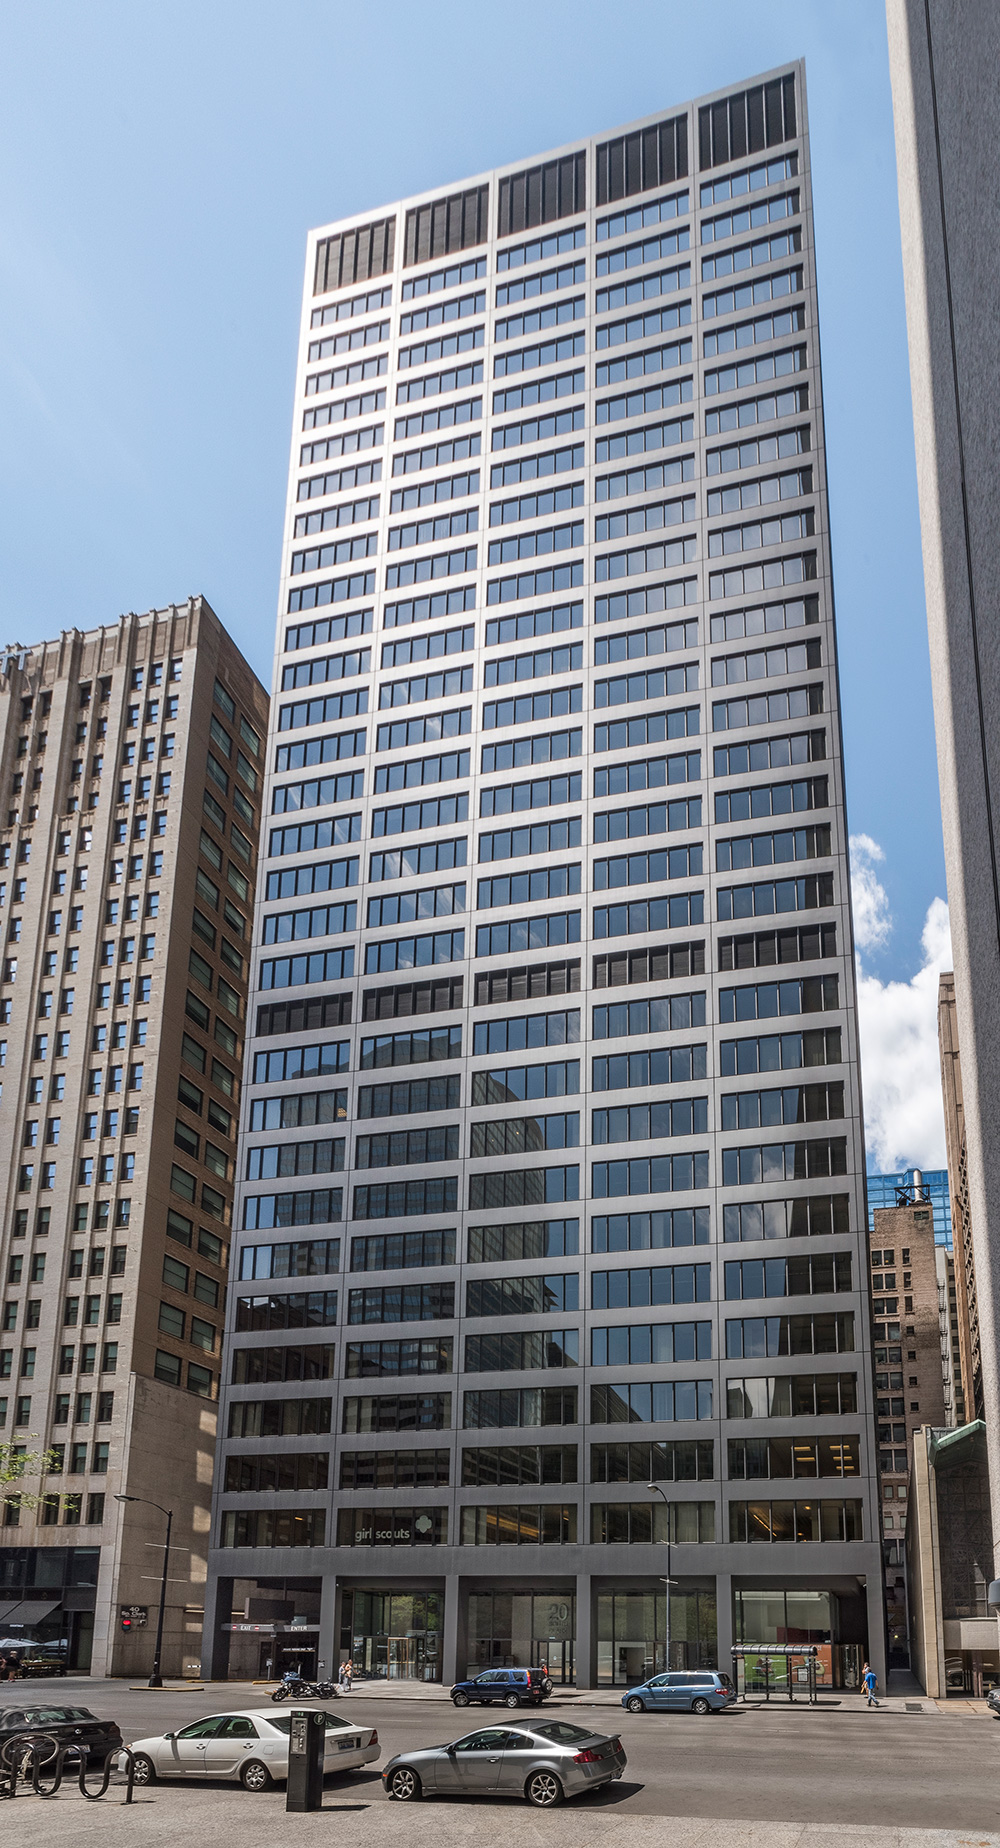 20 South Clark Street in Chicago